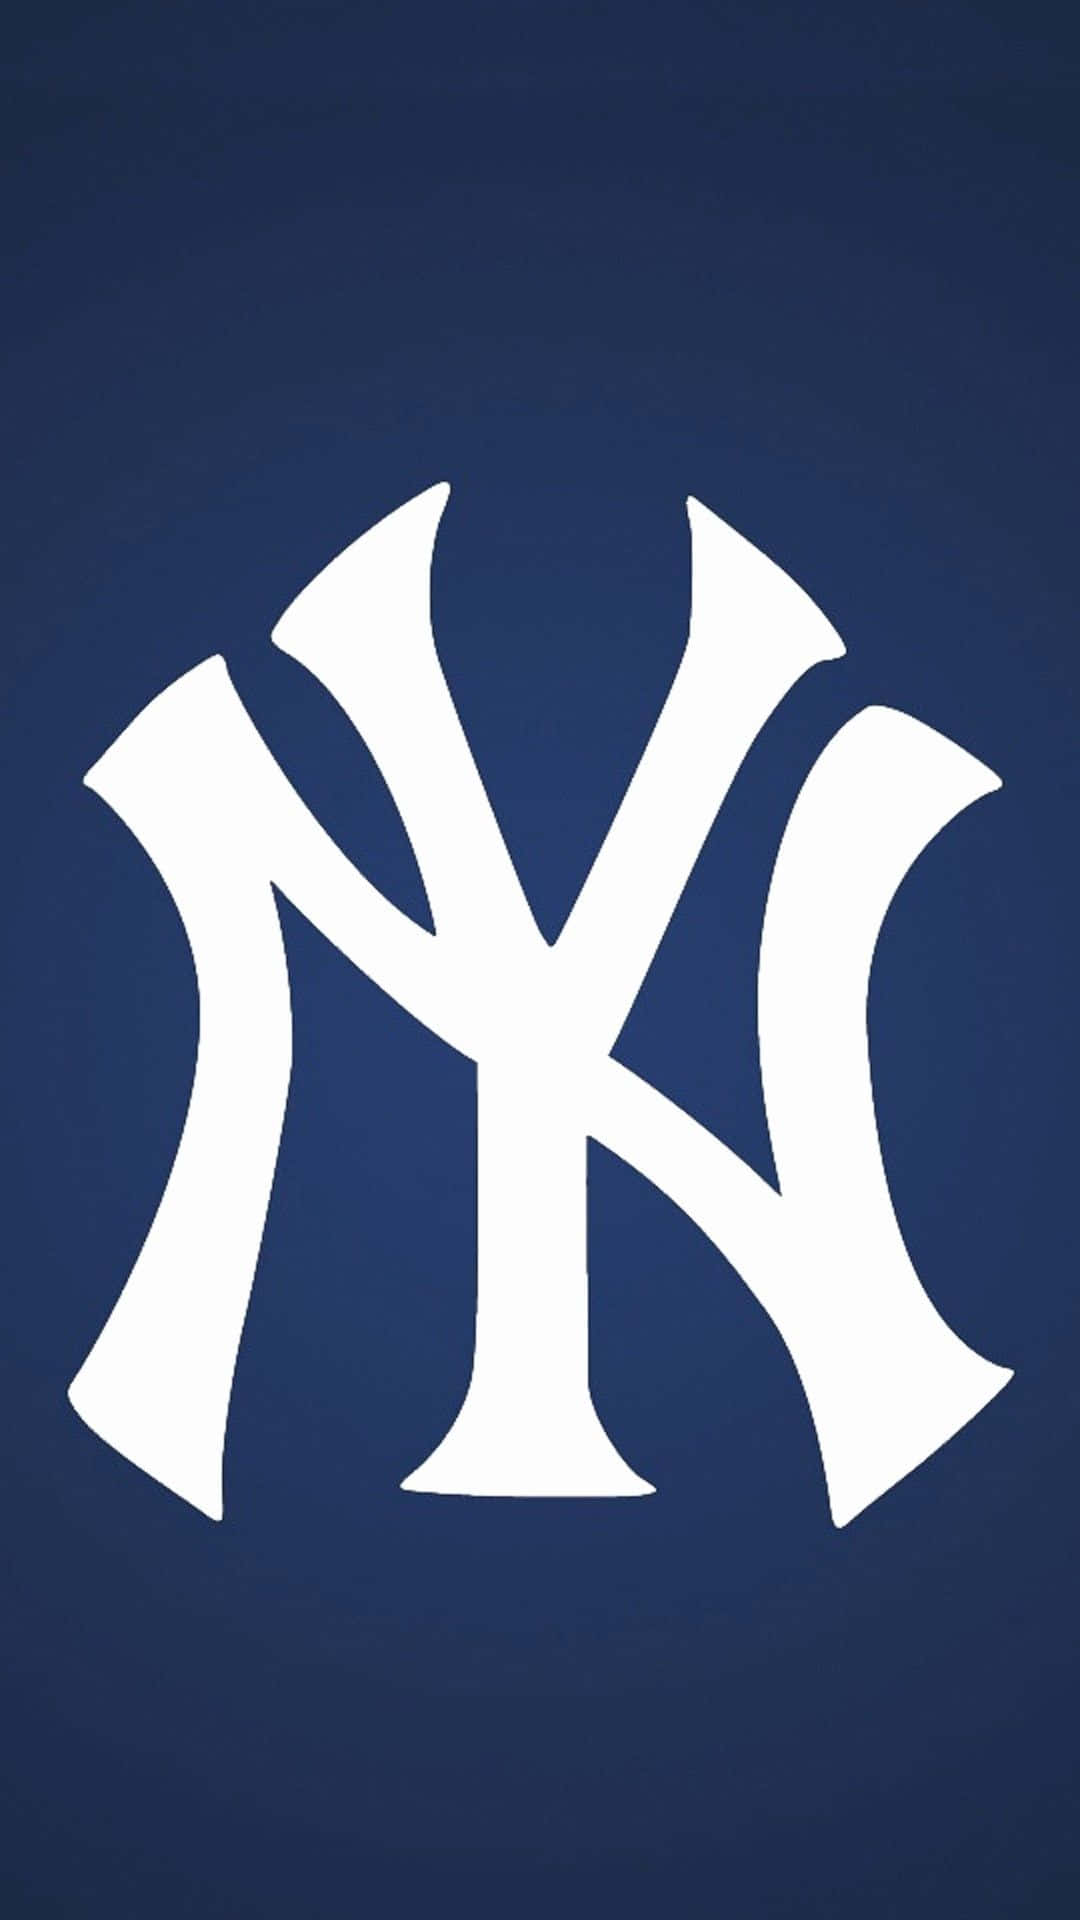 Represent Your Favorite Baseball Team With A Yankees-themed Iphone Cover Wallpaper